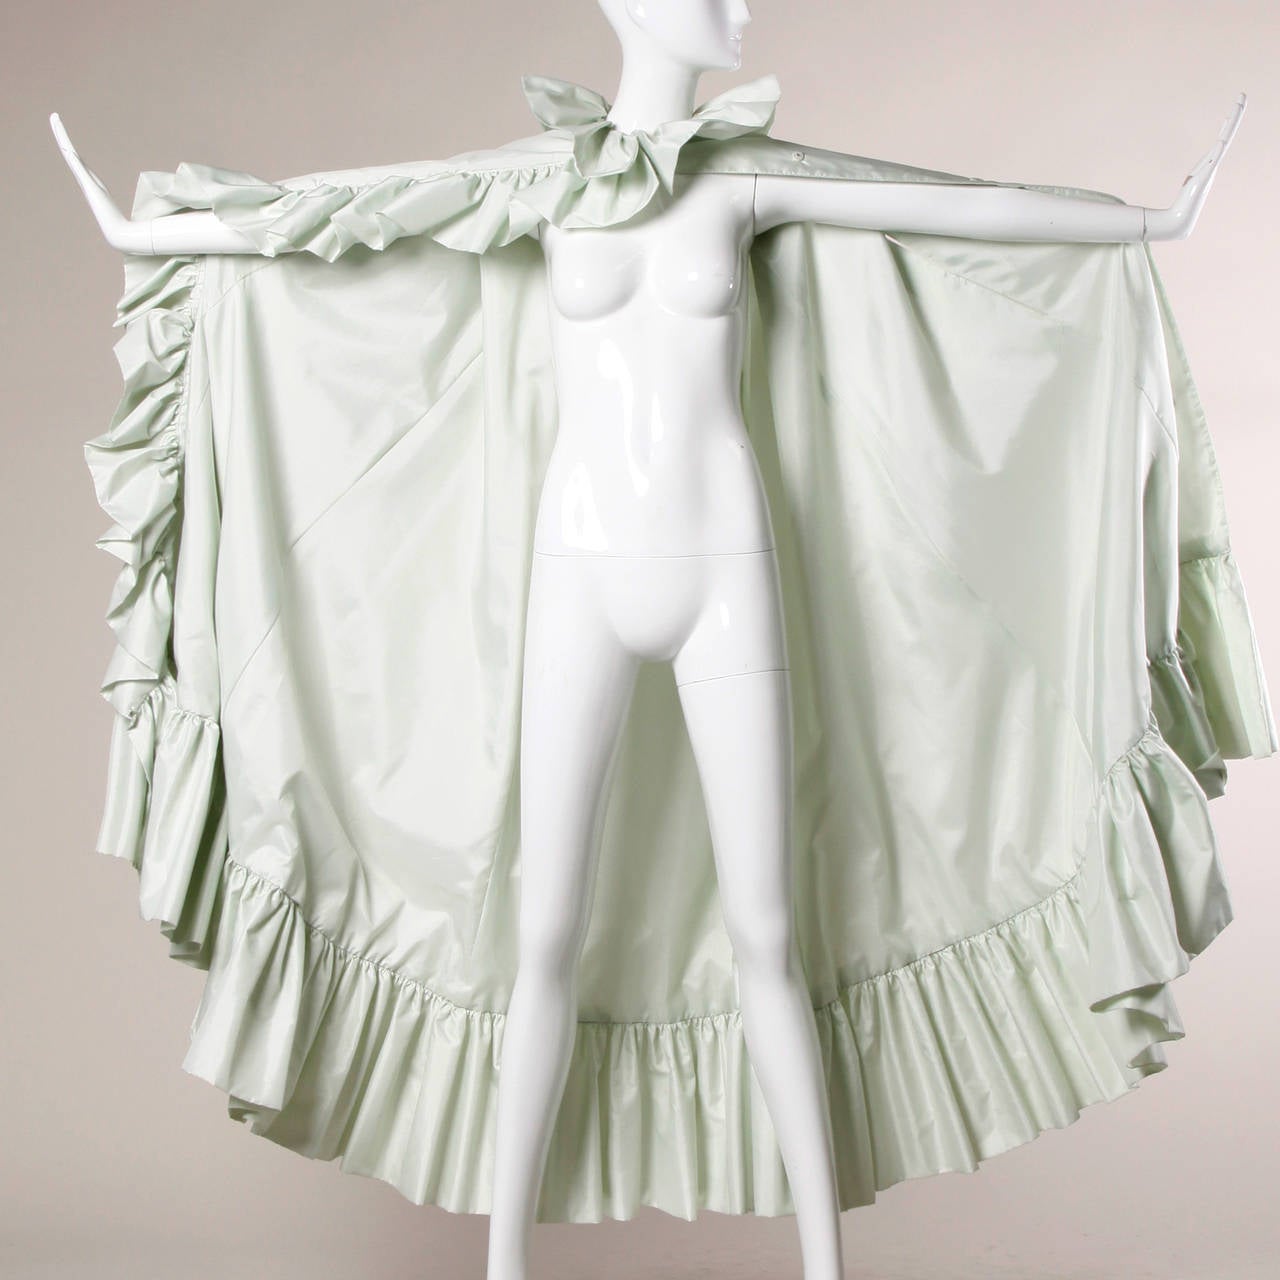 Pale mint green cape coat with a ruffle detail by Donald Brooks for Main Street.

Details:

Fully Lined
Arm Slits
Front Snap and Hook Closure
Marked Size: Not Marked
Estimated Size: Free
Color: Pale Mint Green
Fabric: Silk Blend
Label: